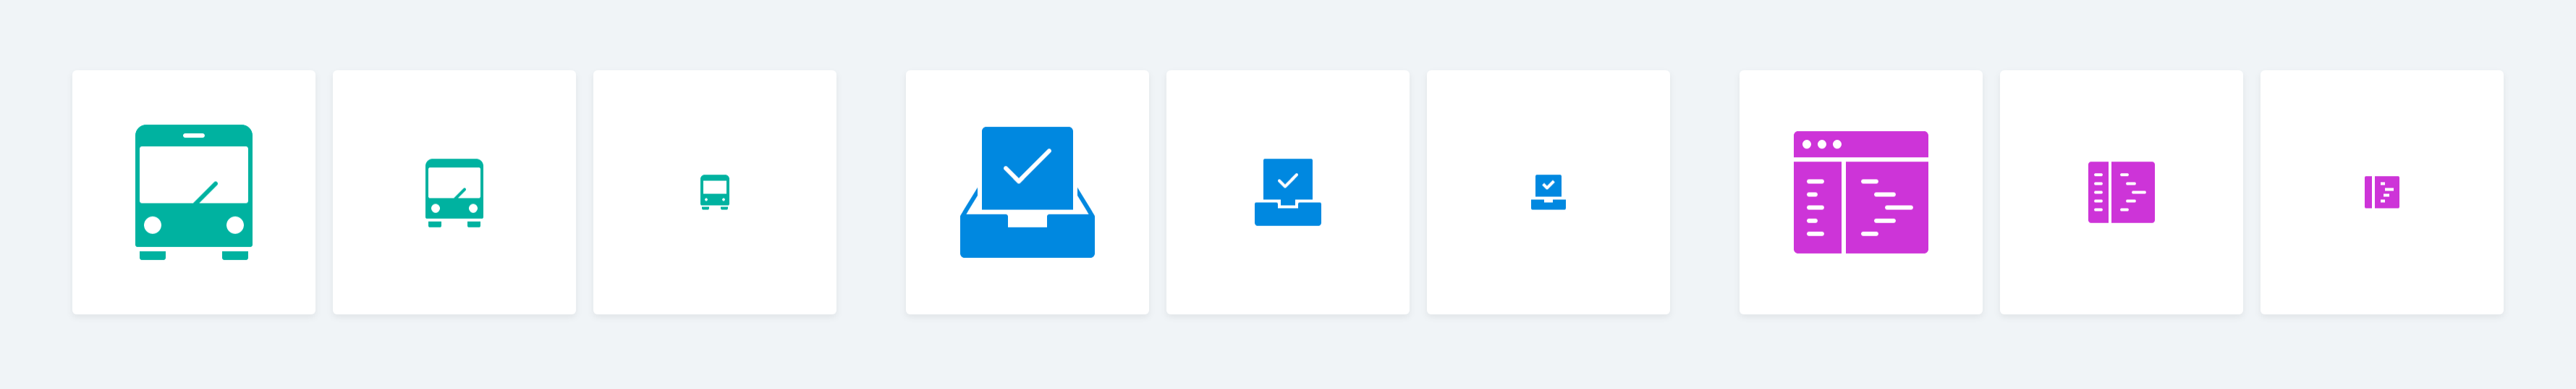 Responsive icons add detail at larger sizes.